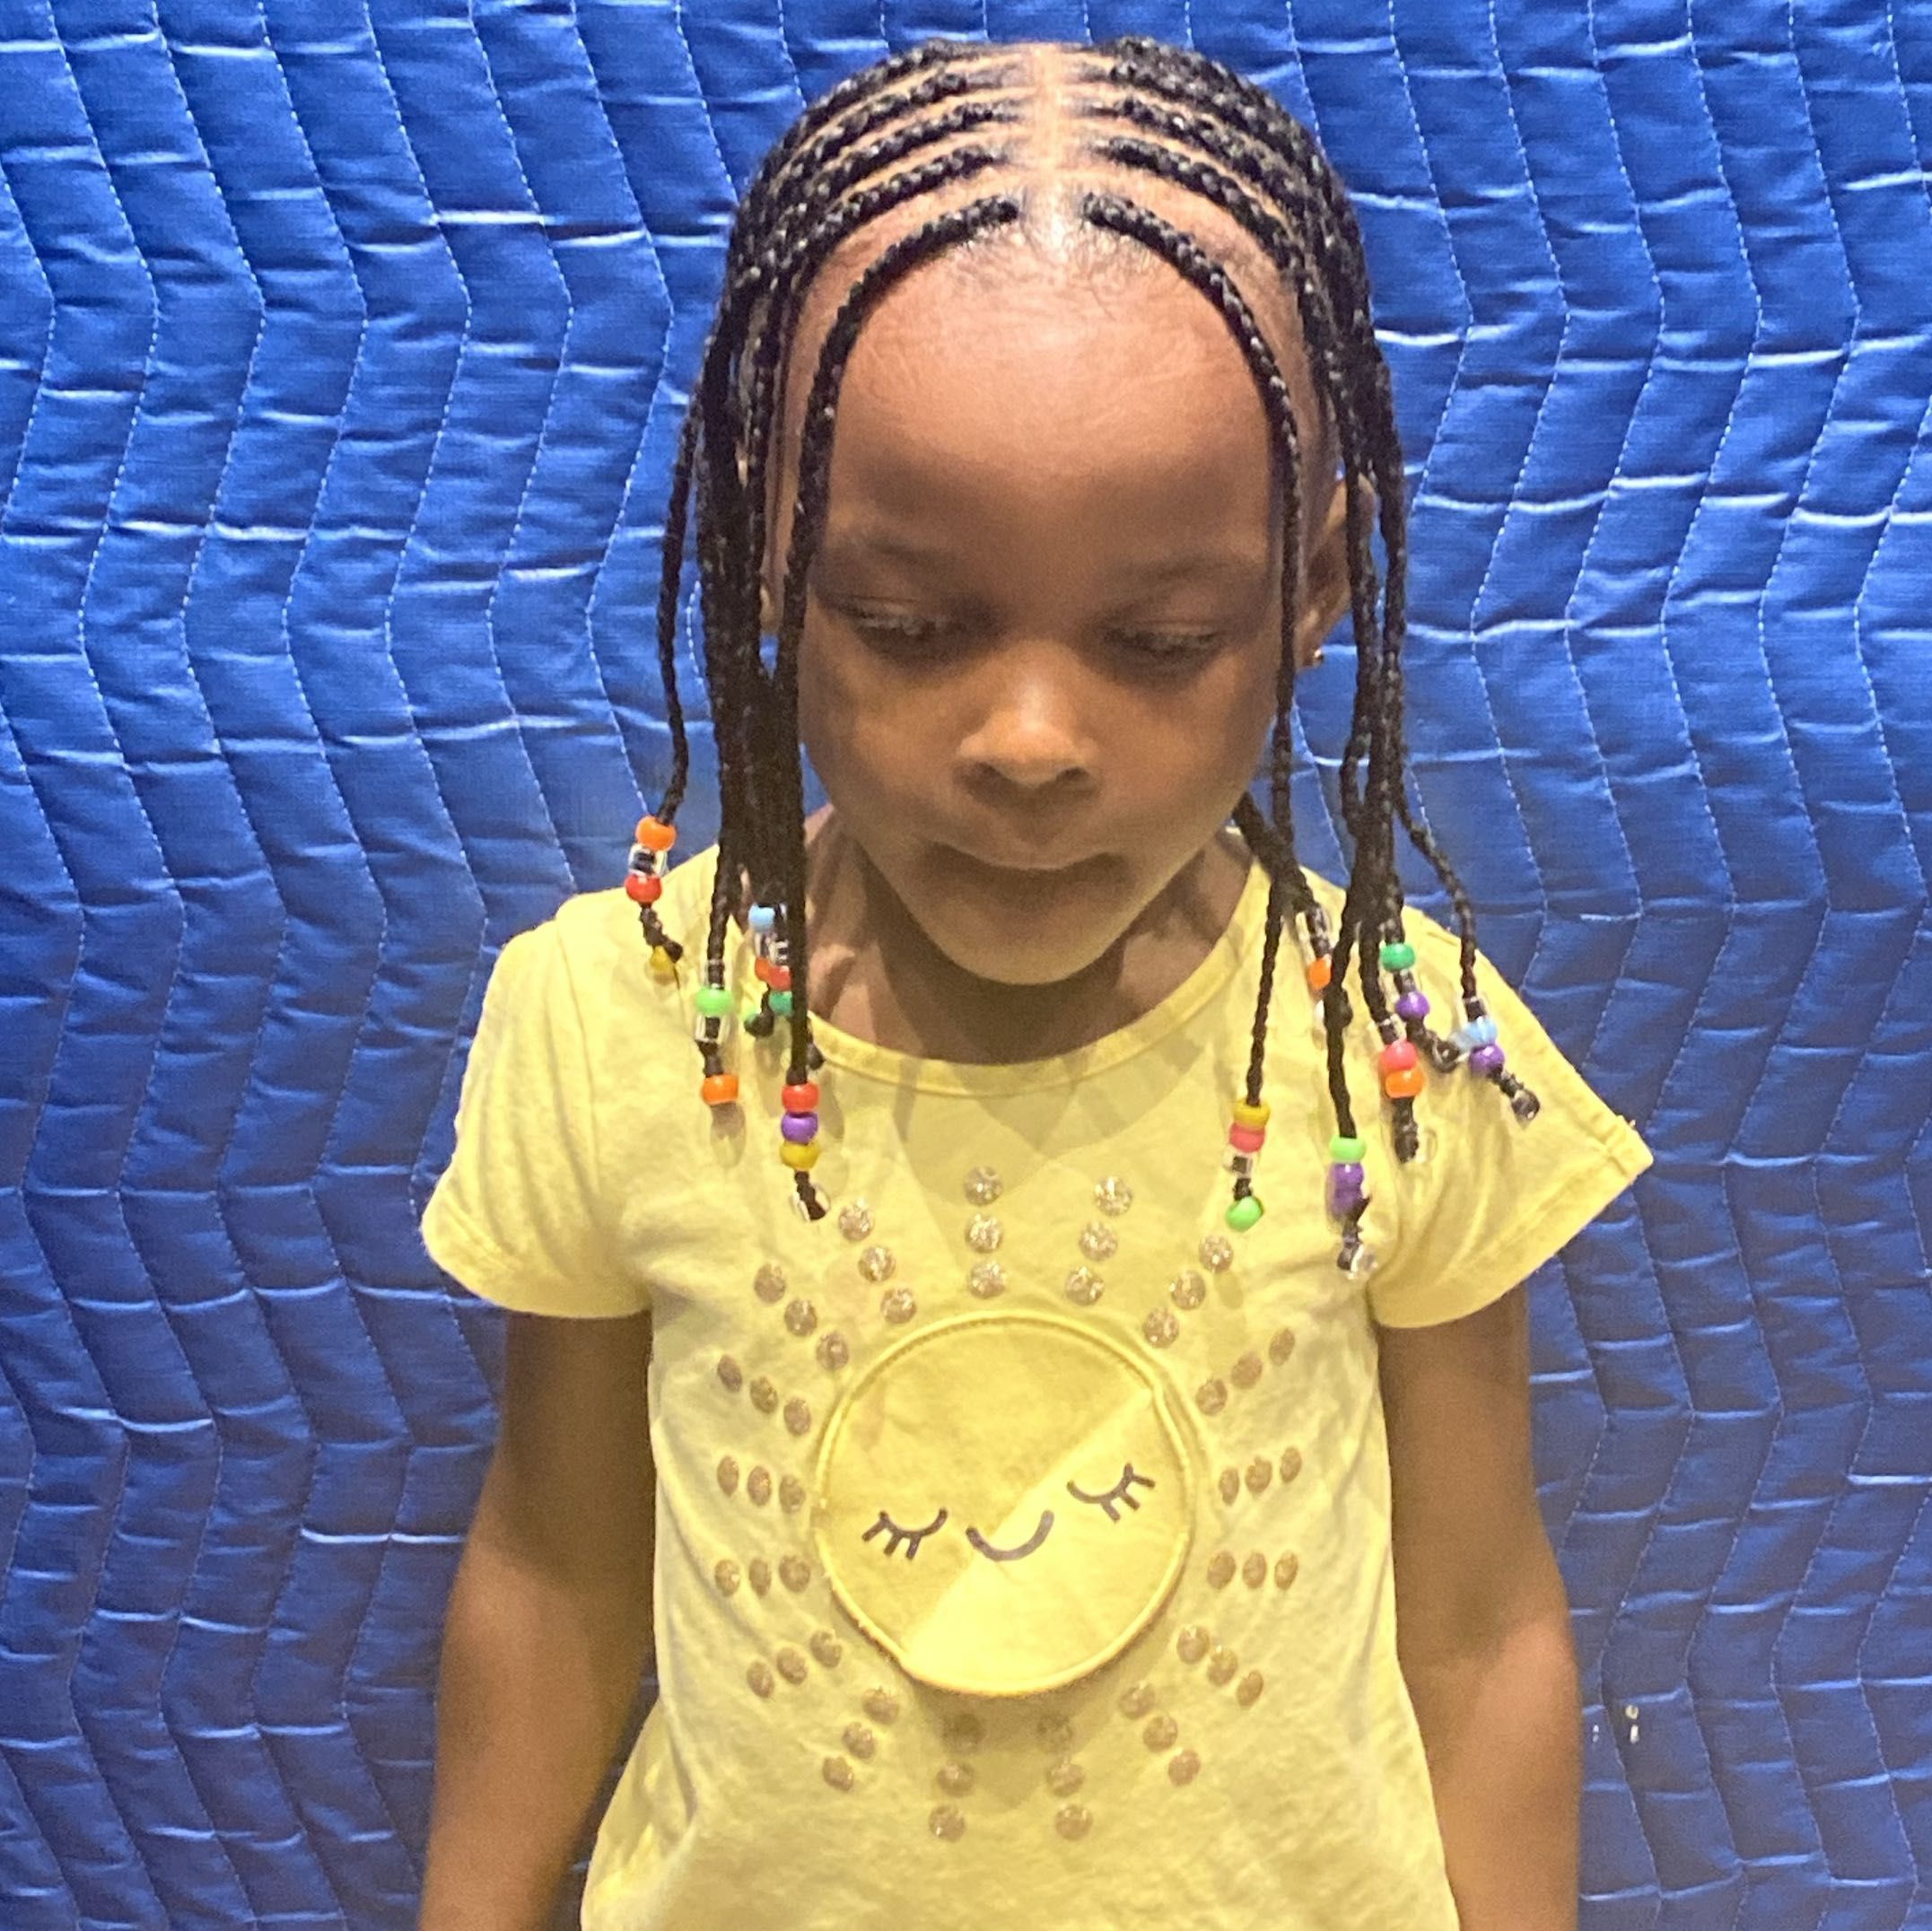 Kids Braided Styles Ages 2-9 years old portfolio